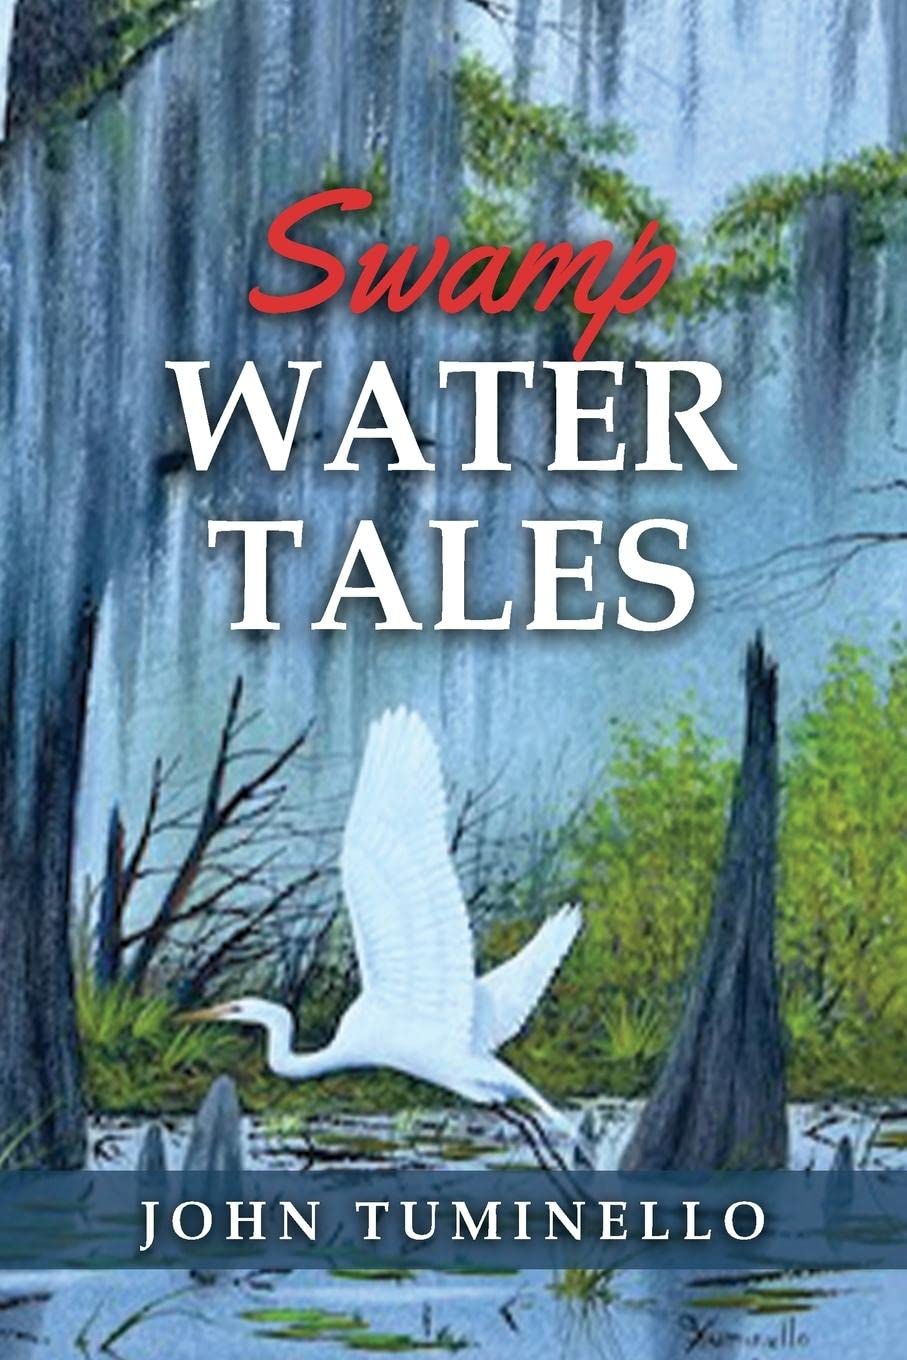 Author's Tranquility Press Releases "Swamp Water Tales" - A Gripping Collection of Southern Gothic Stories